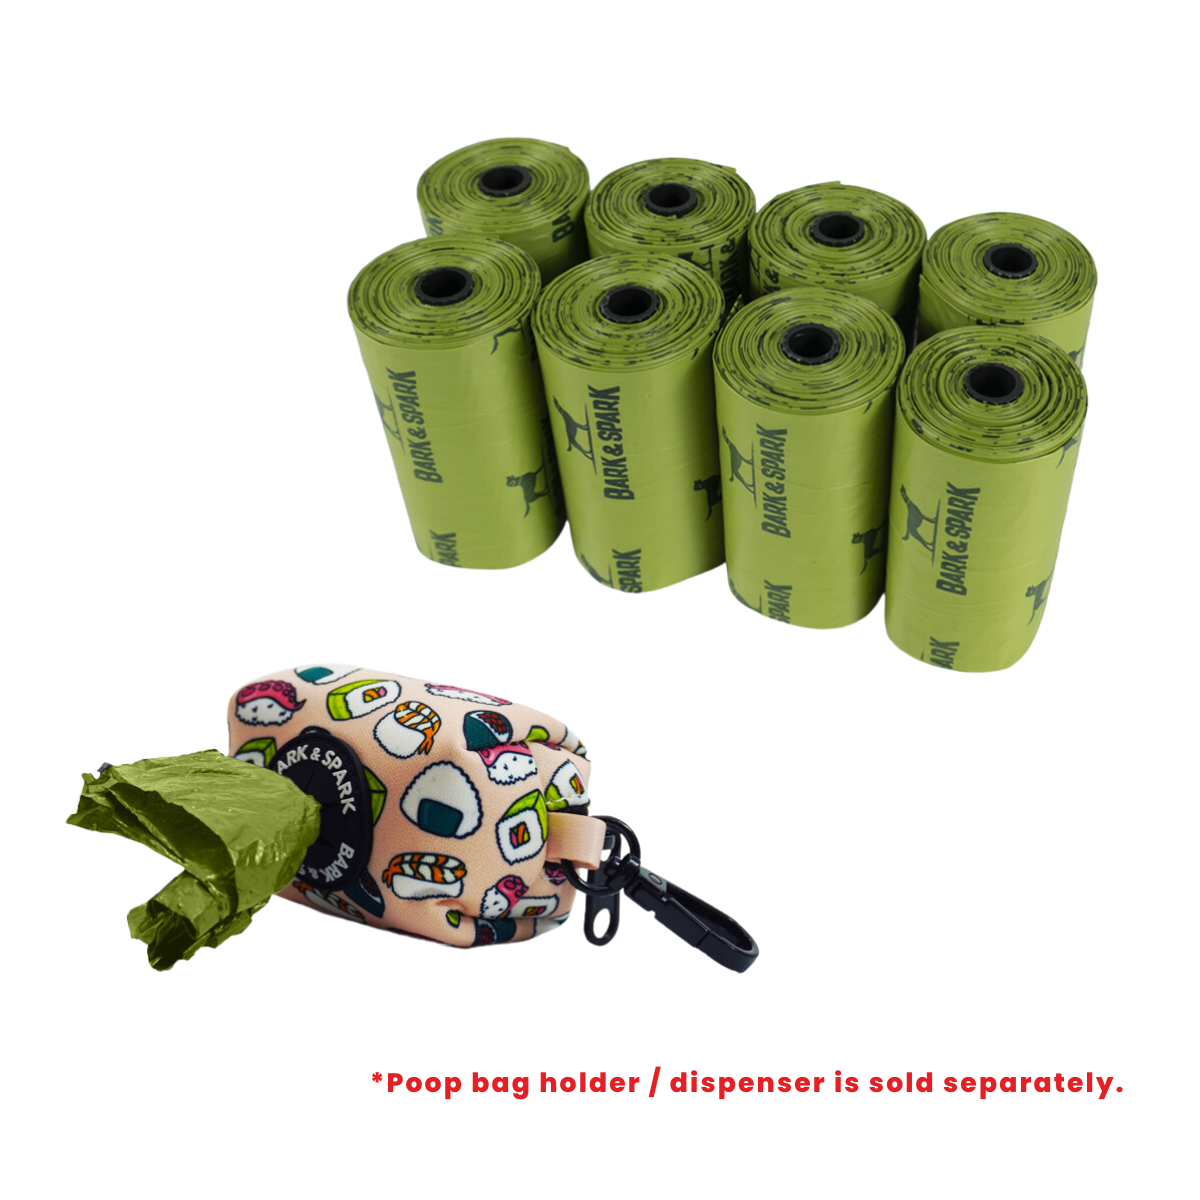 Dog Poop Bag Refill in Packs of 8 - Biodegradable, Unscented (8.5" X 12.5")